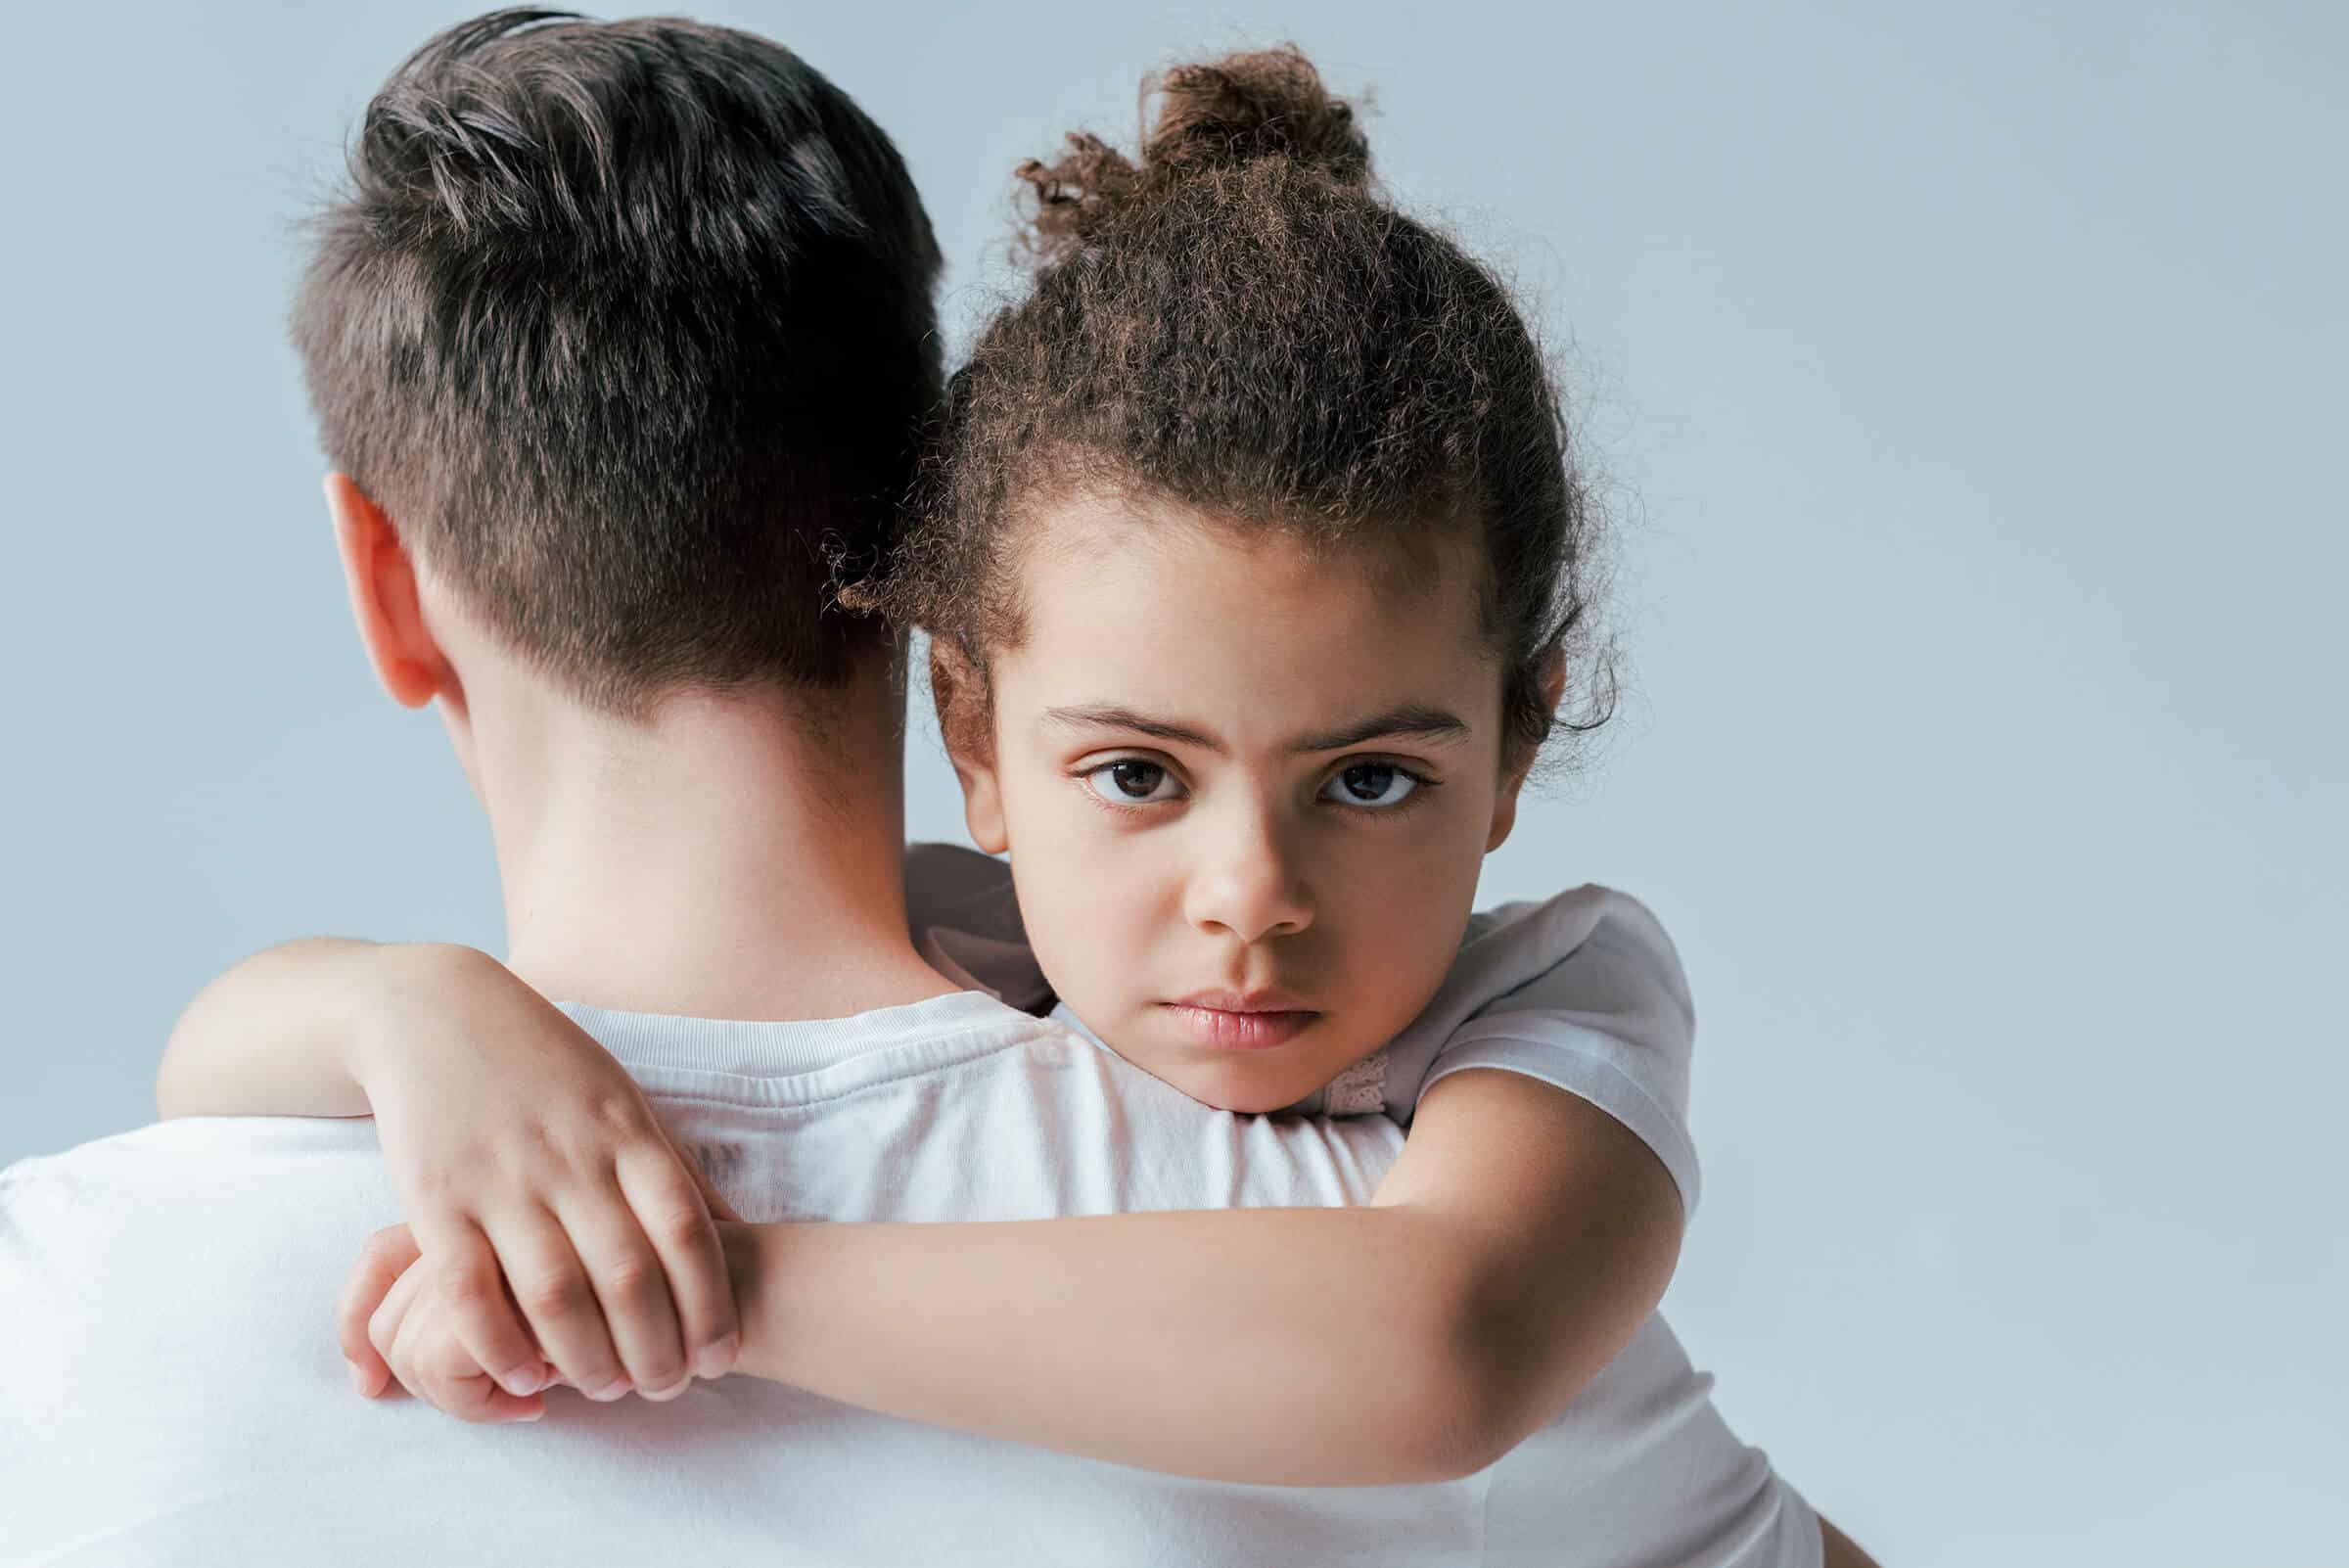 A young girl with a worried expression is tightly embracing her father in a hug.